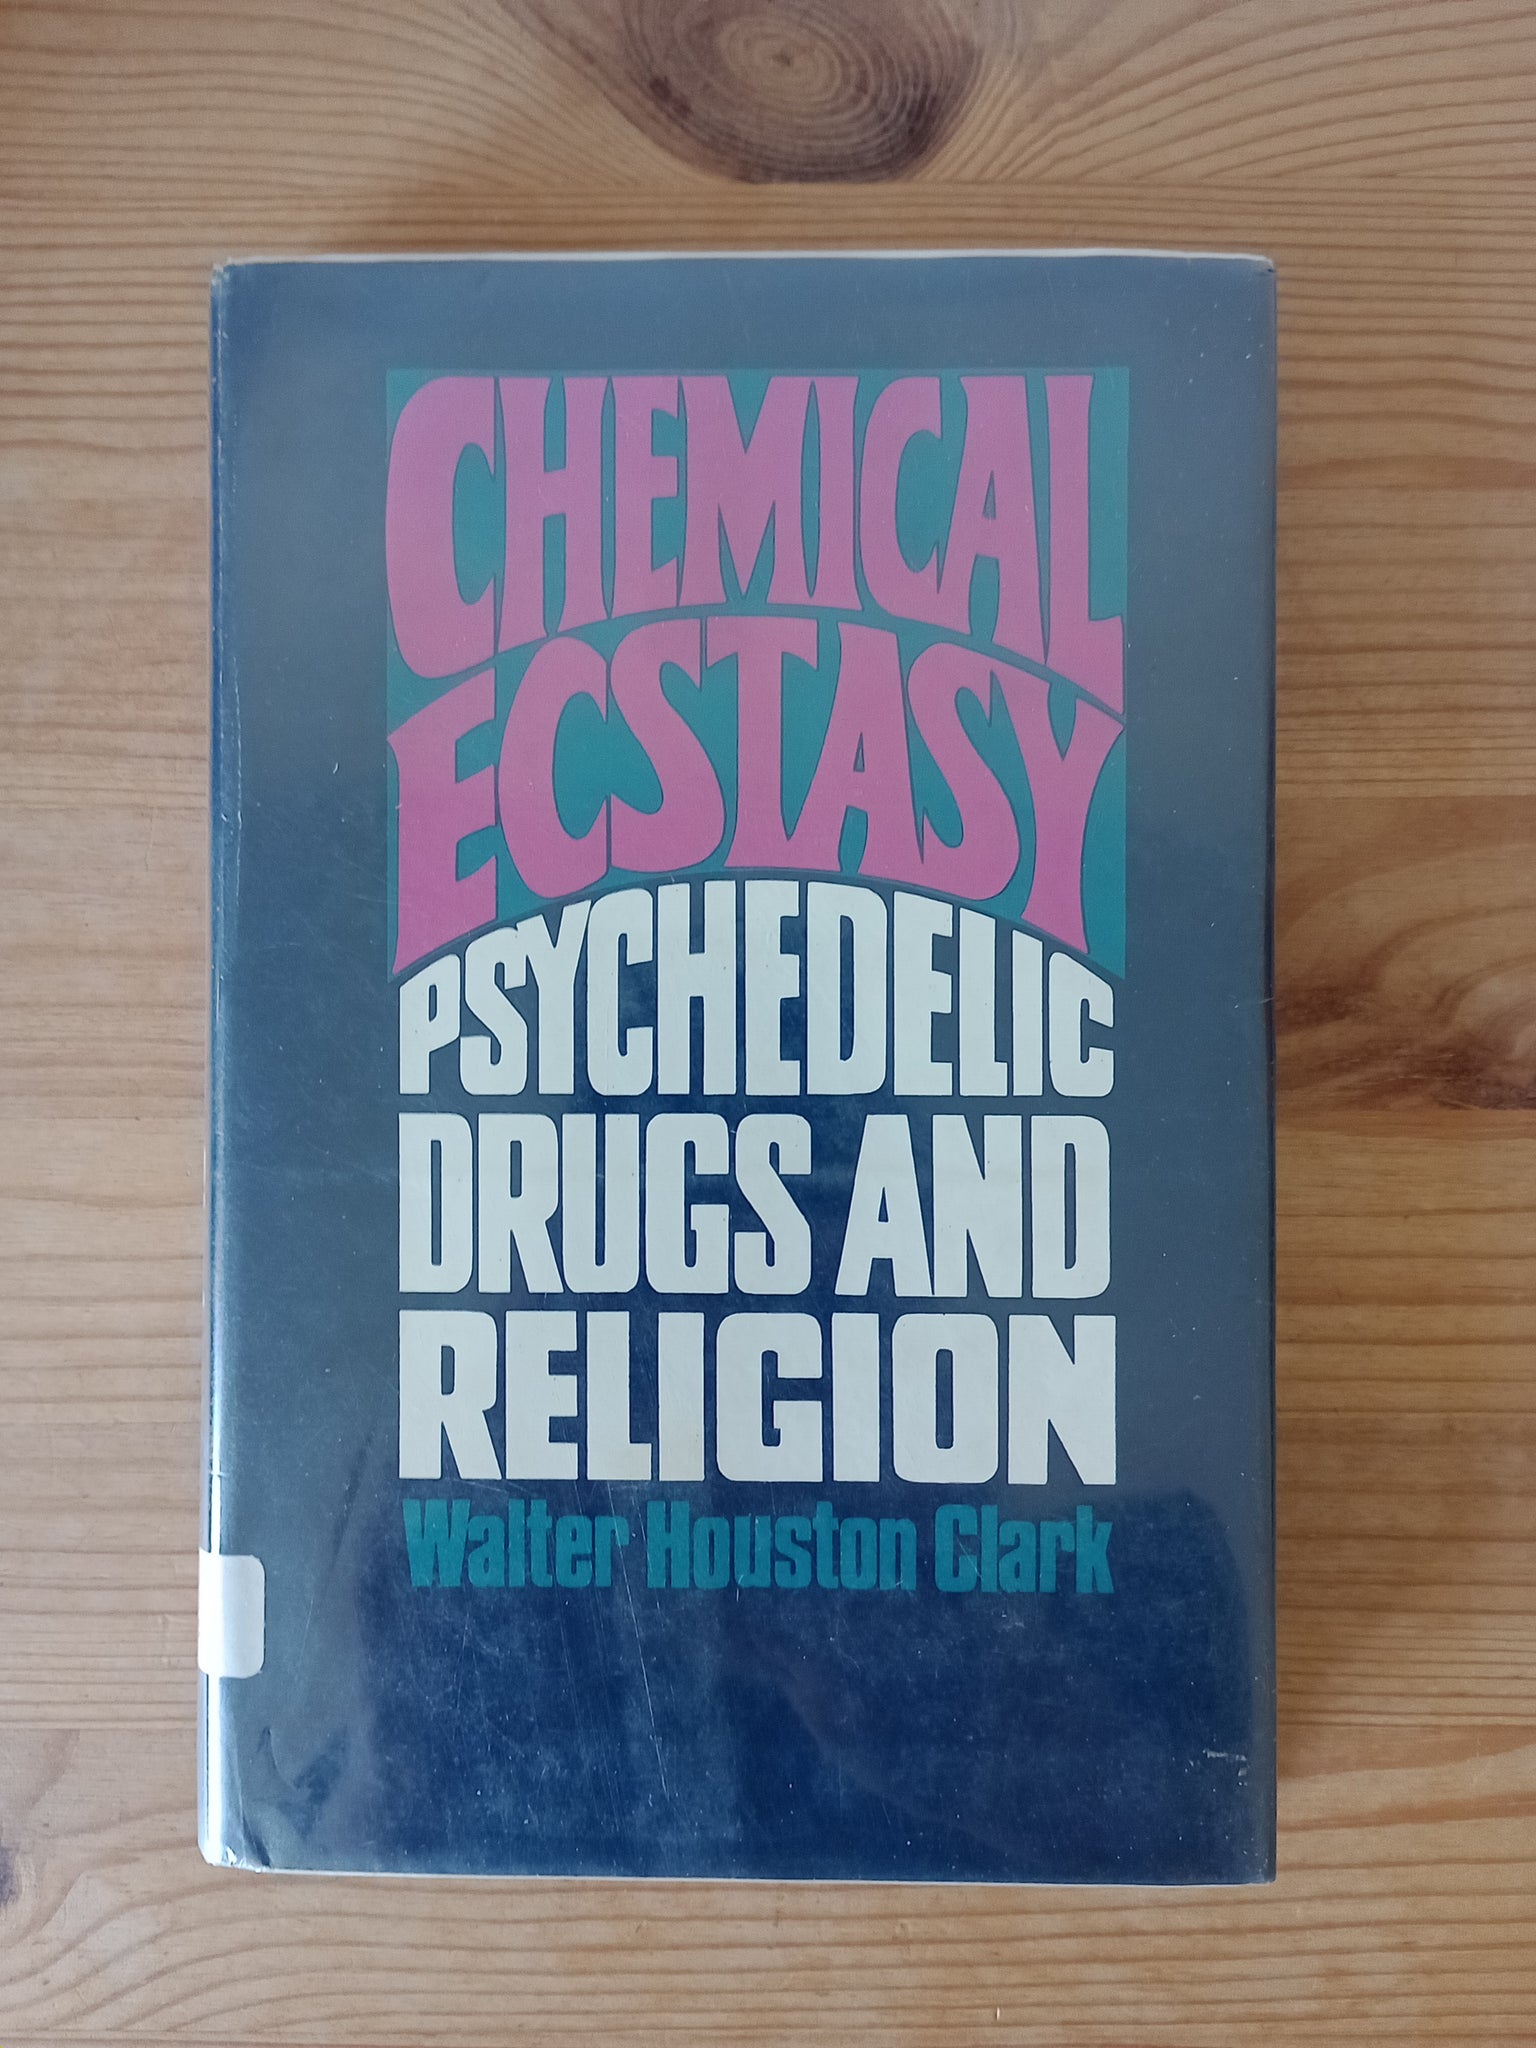 Chemical Ecstasy: Psychedelic Drugs and Religion (1969) by Walter Houston Clark